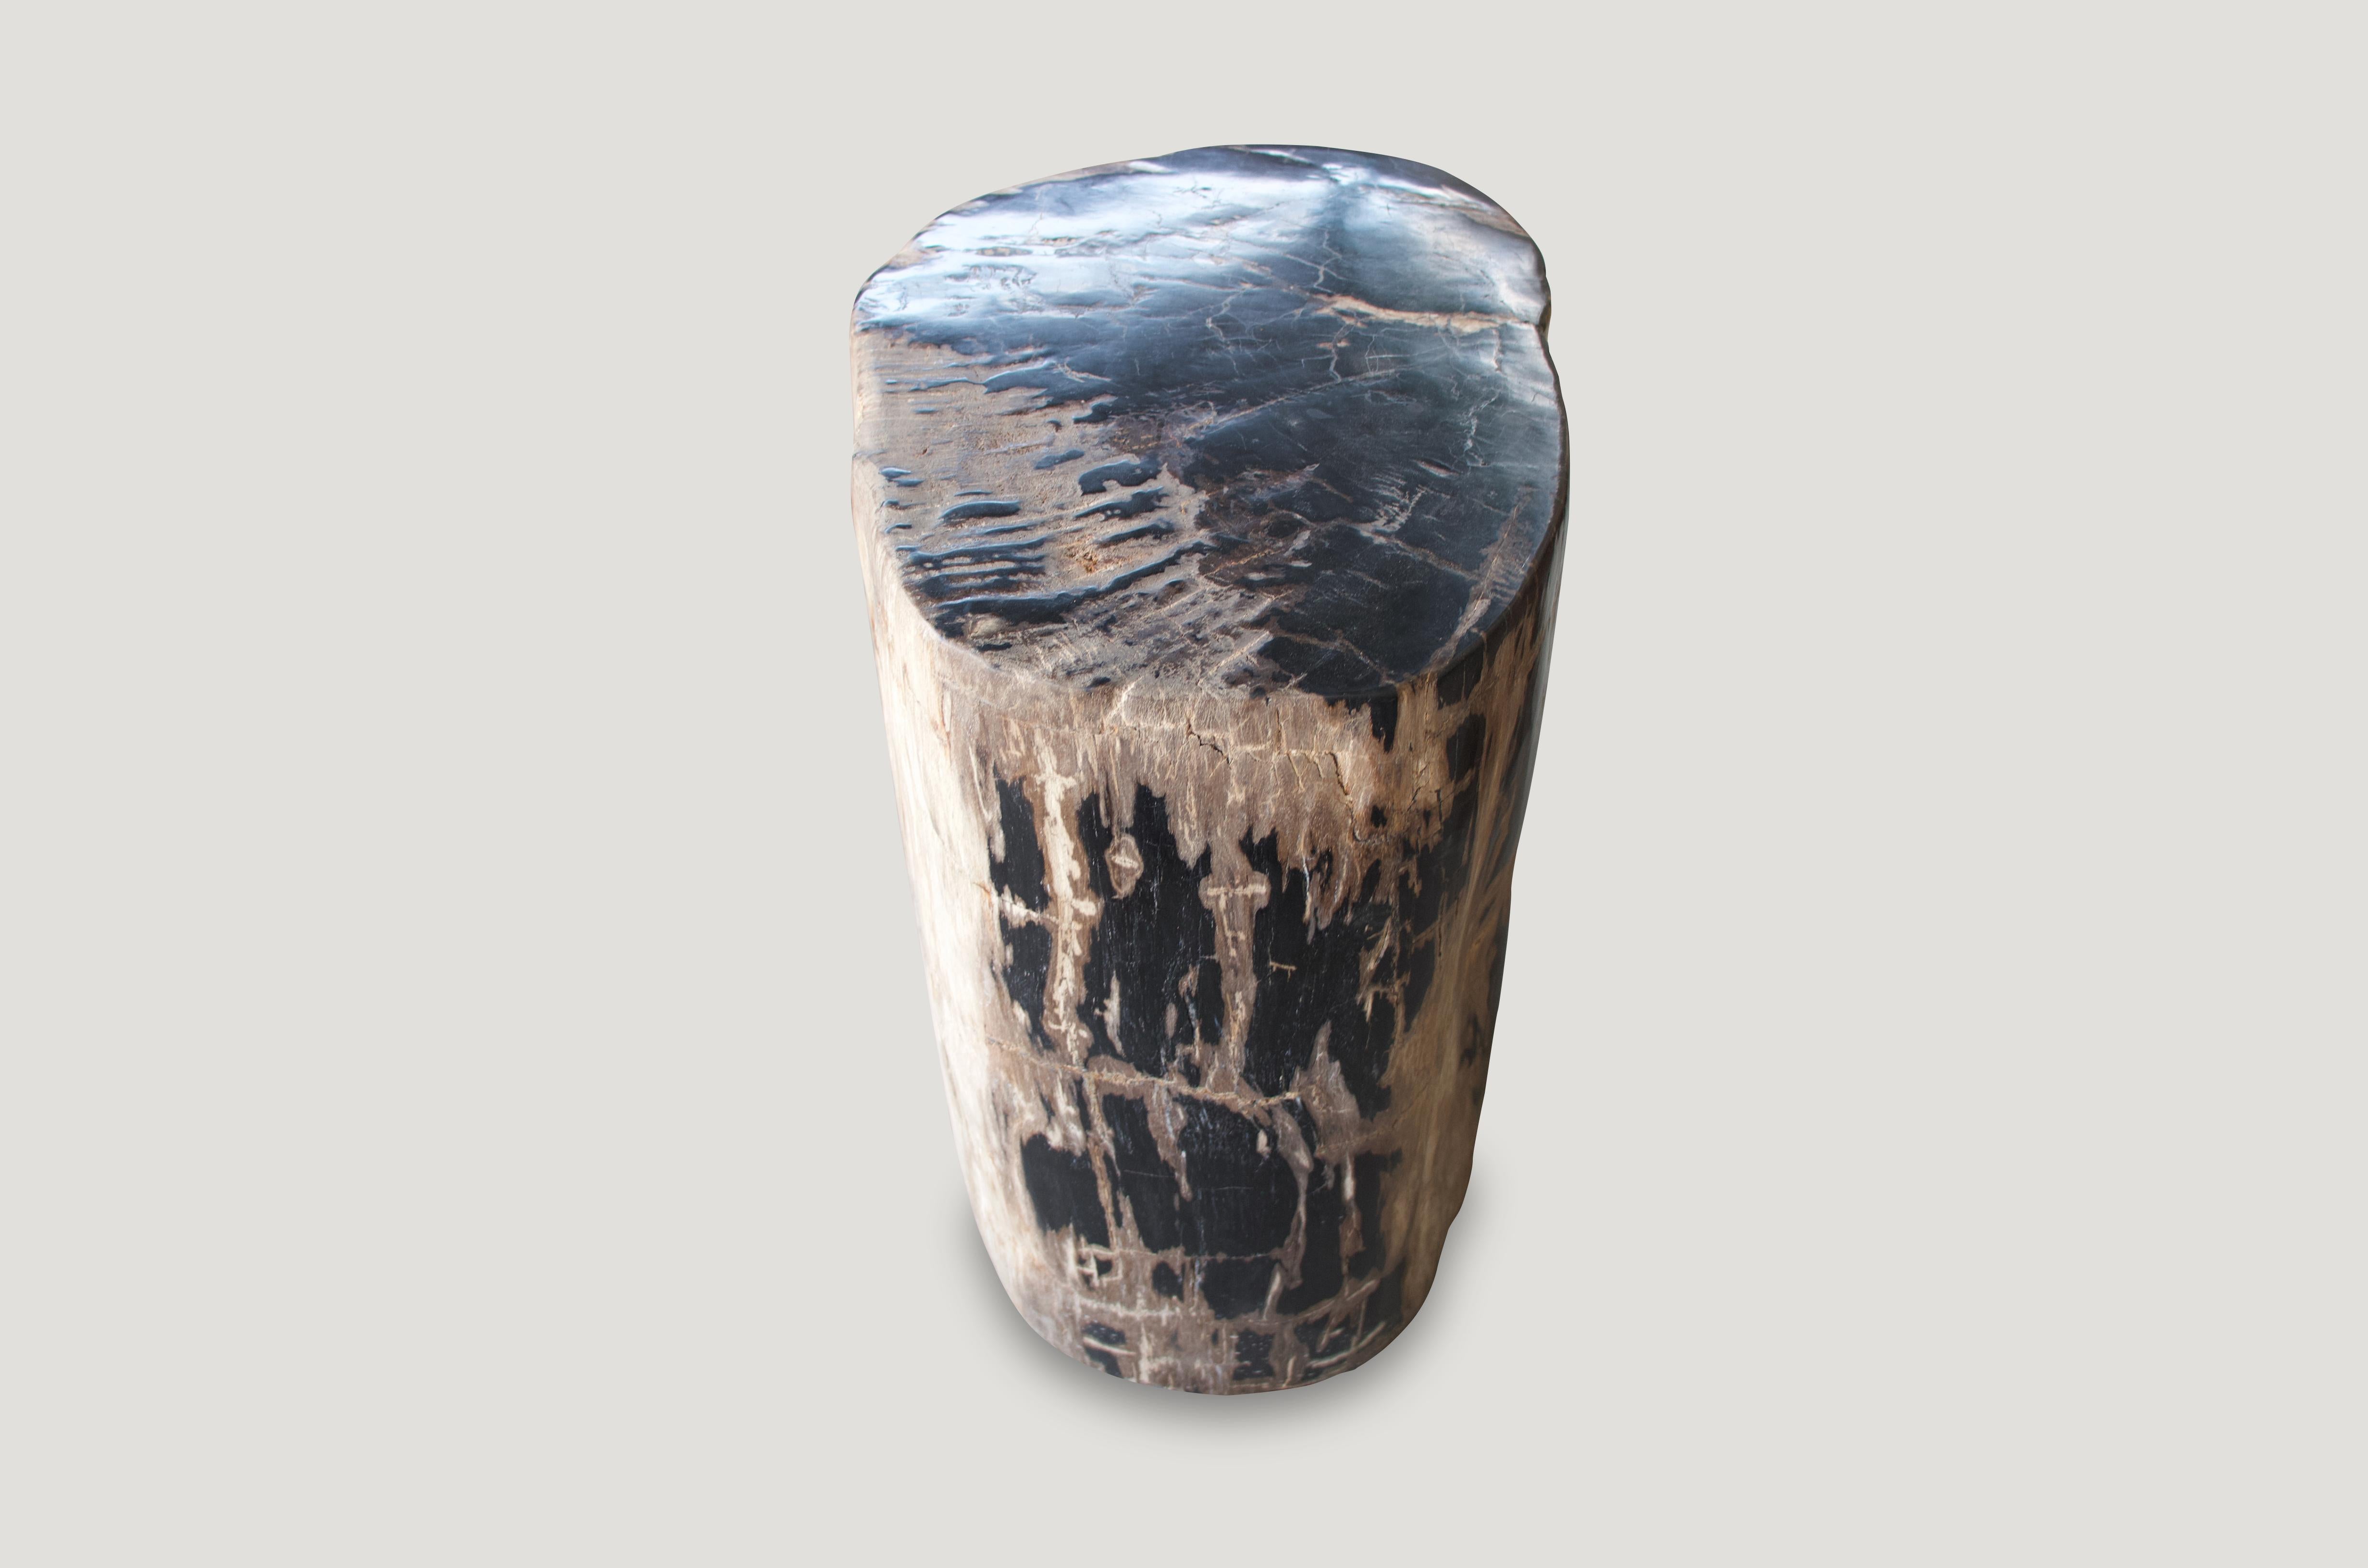 Contrasting earth tones in this high quality petrified wood side table with natural occurring pattern. We have a collection of three, all cut from the same petrified log. The price reflects one.

As with a diamond, we polish the highest quality